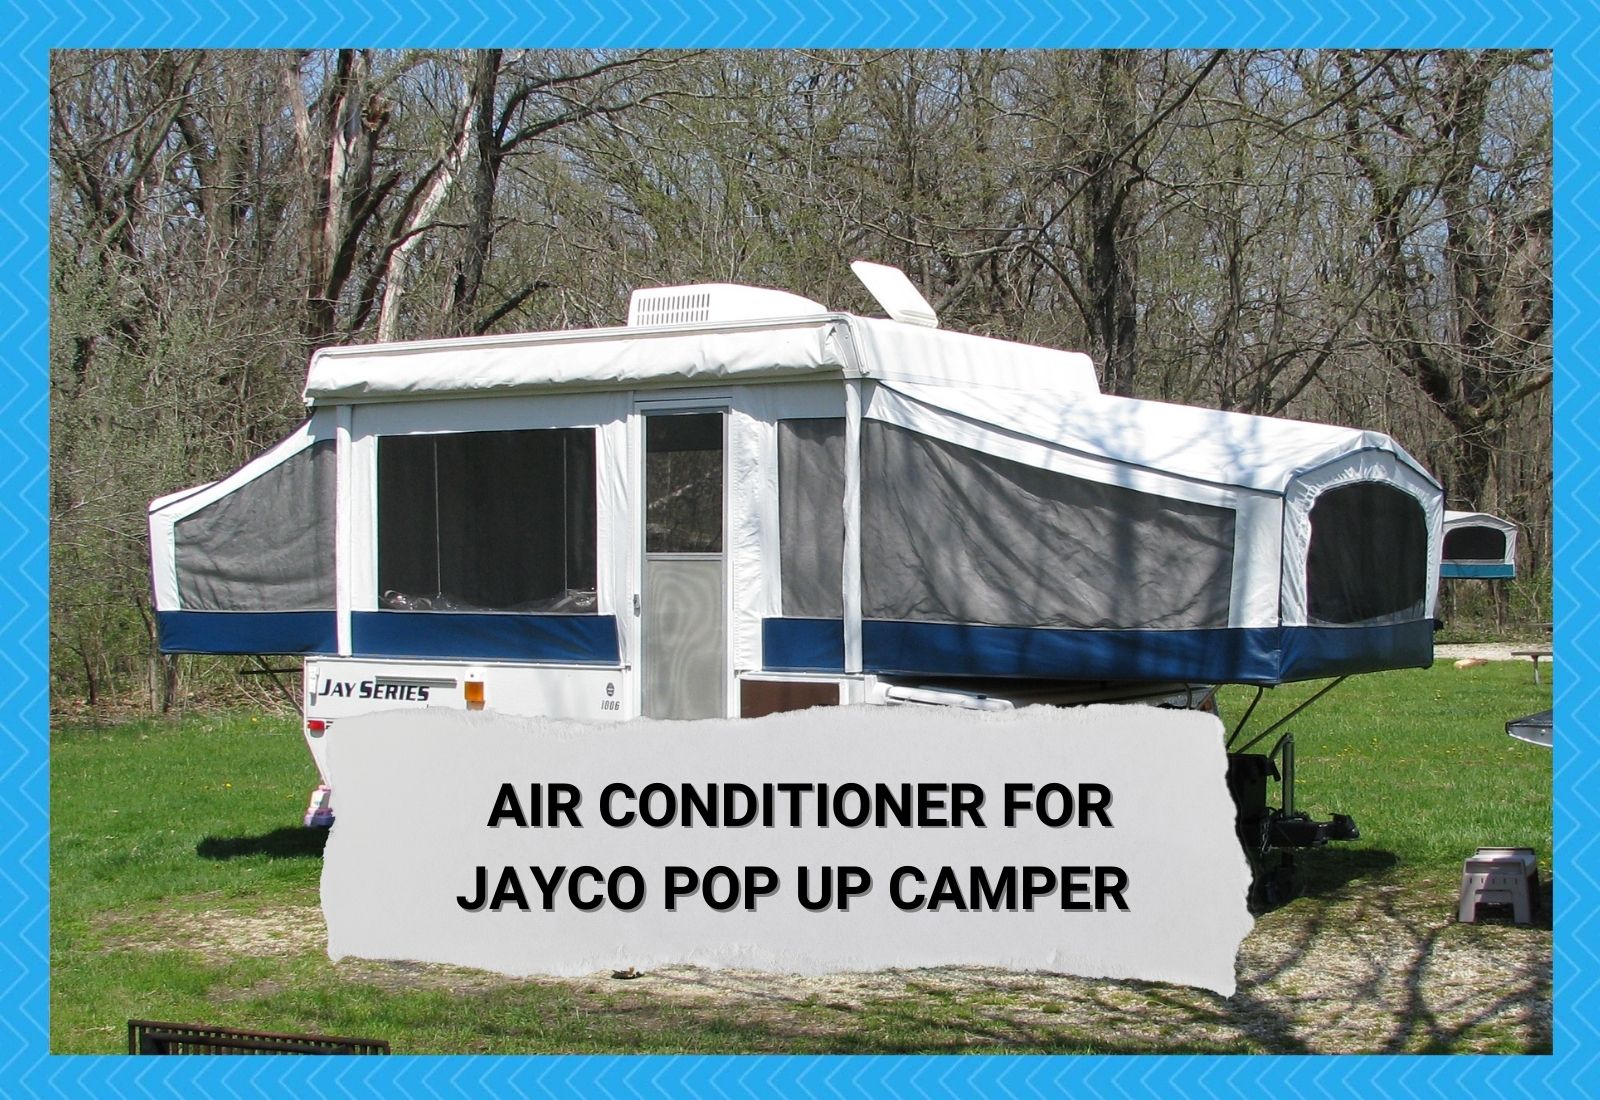 Air Conditioner For Jayco Pop Up Camper